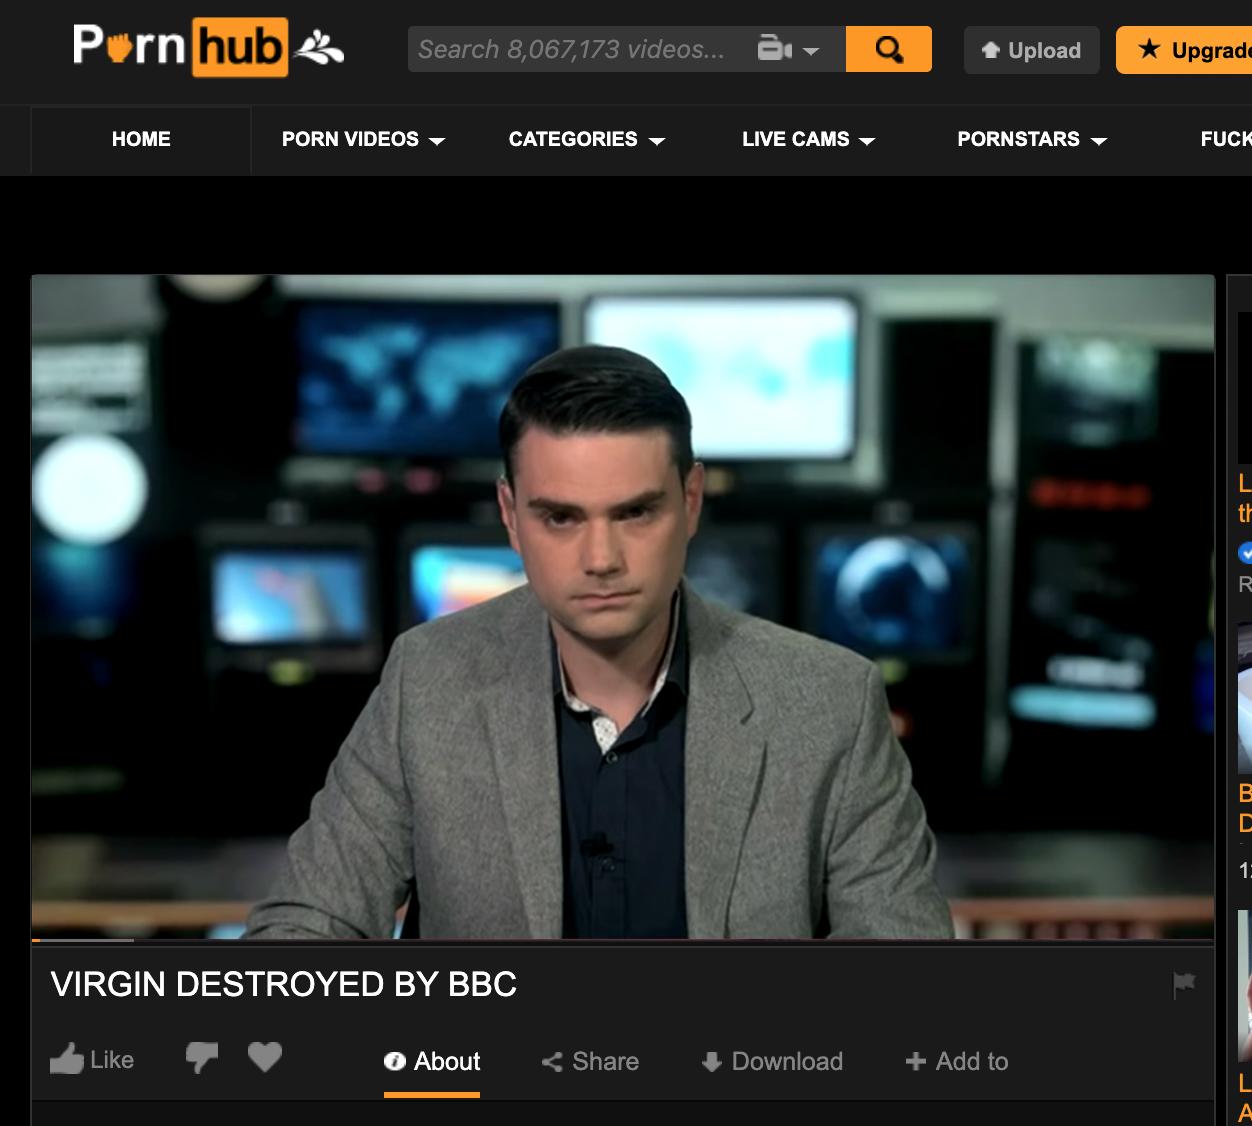 ben shapiro baby face - Porn hub Search 8,067,173 videos... a Upload Upgrade Home Porn Videos Categories Live Cams Pornstars Fuck # Virgin Destroyed By Bbc About